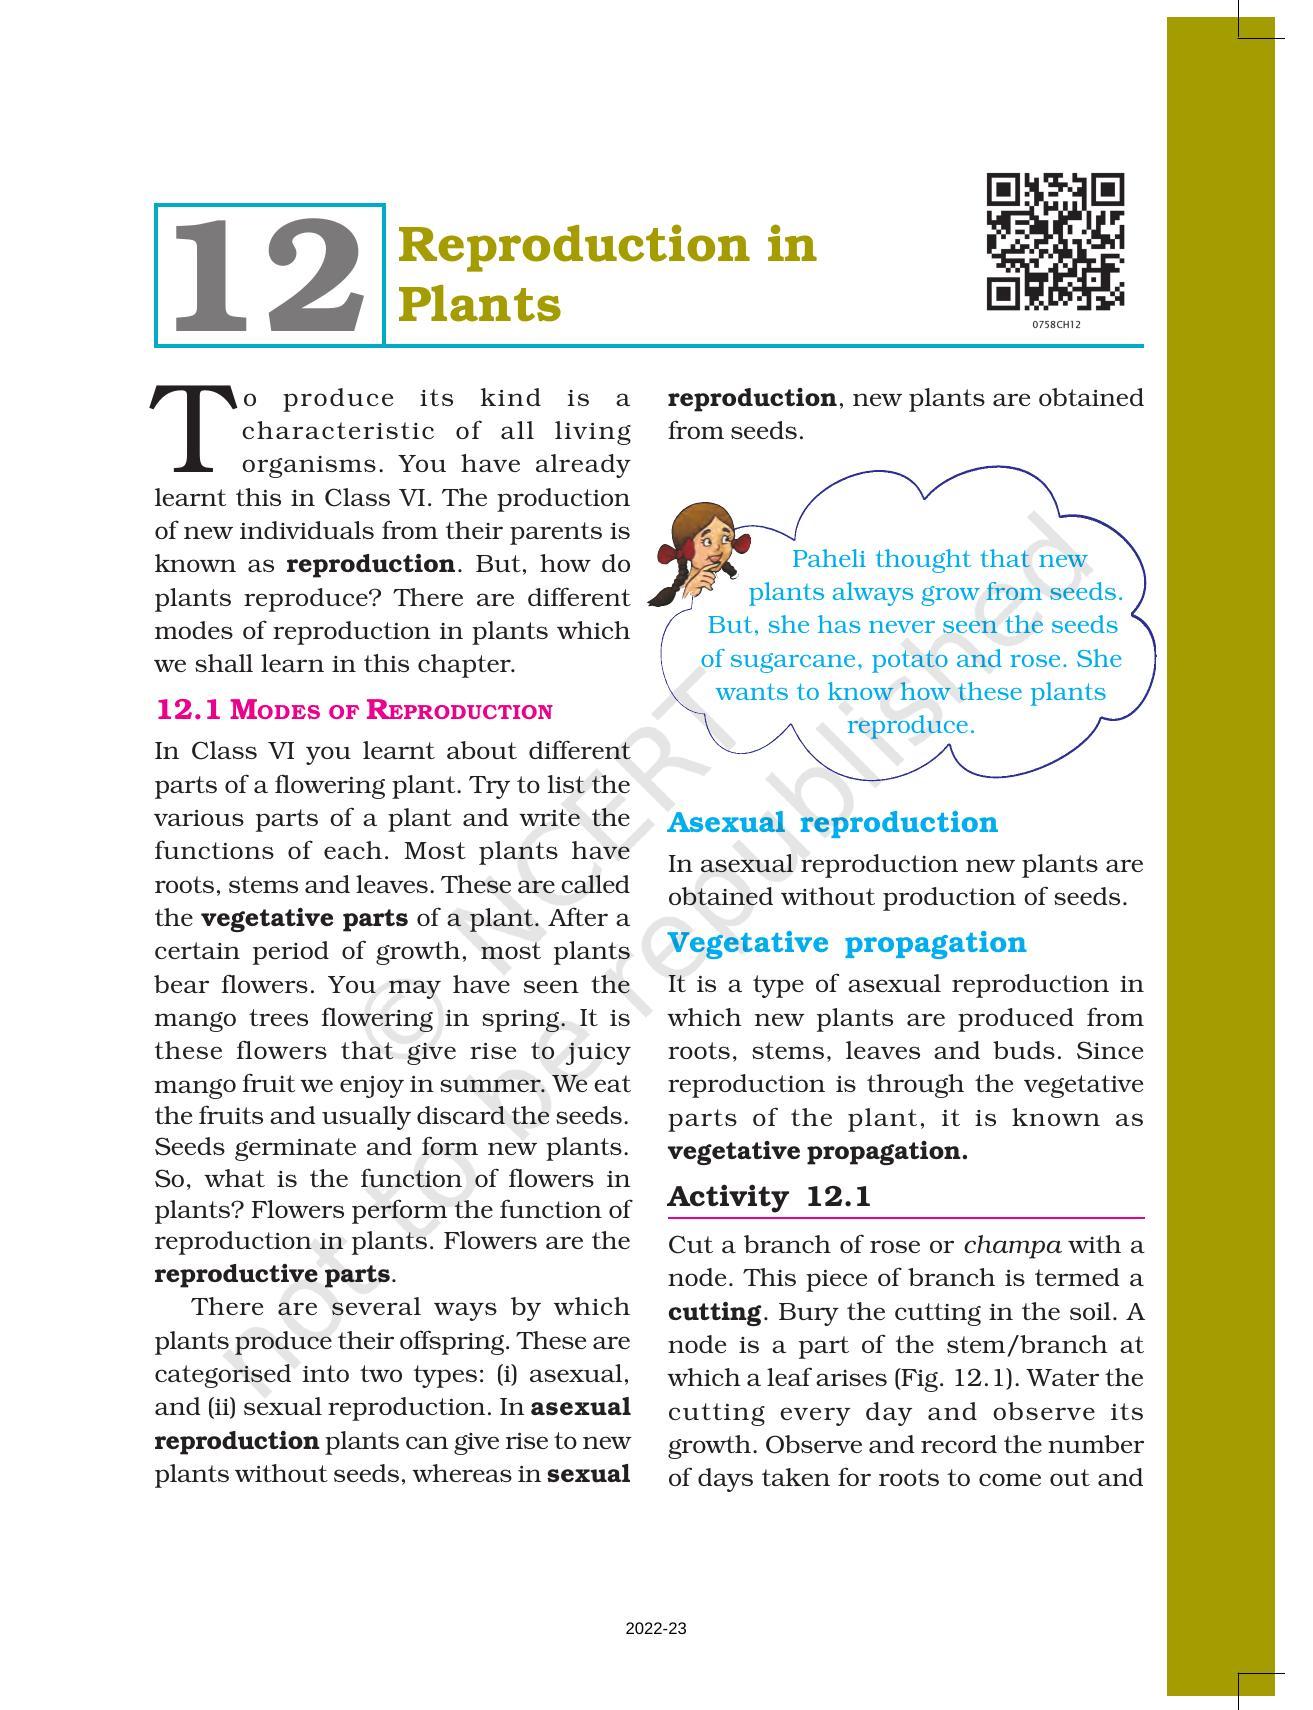 NCERT Book for Class 7 Science: Chapter 12-Reproduction in Plants - Page 1